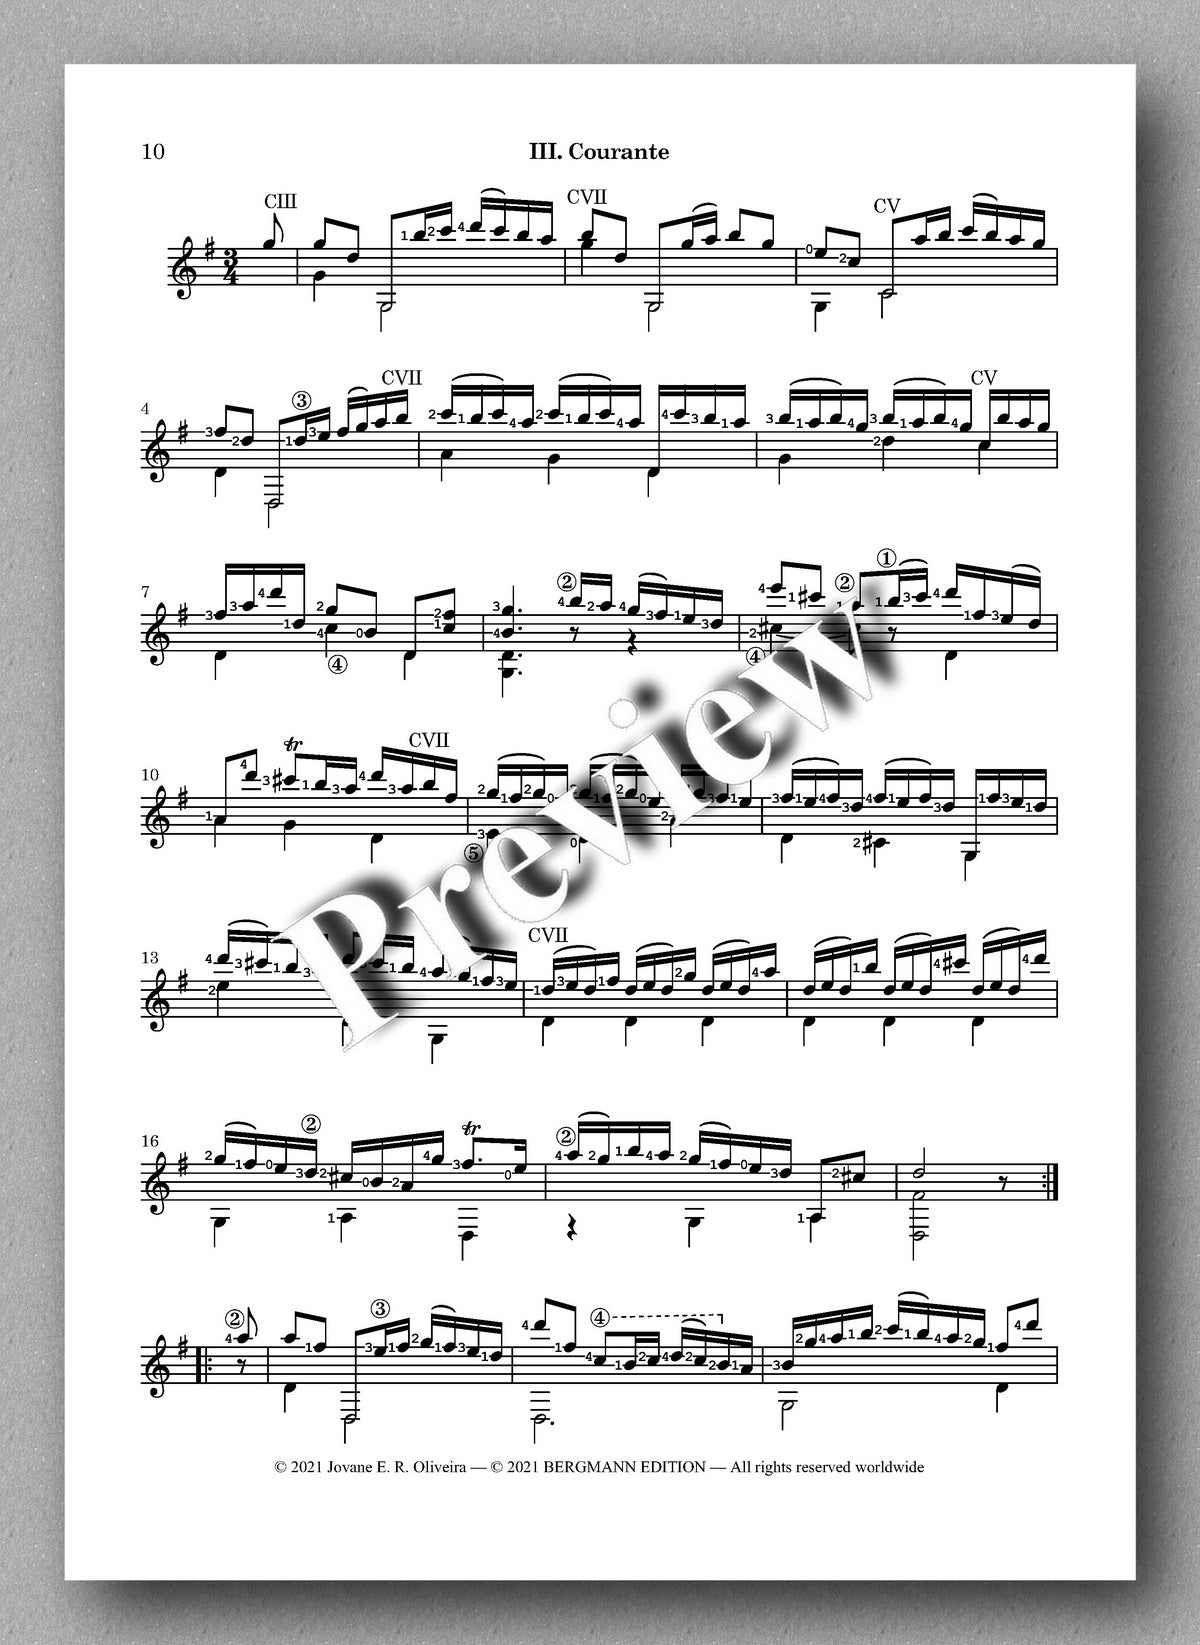 Bach-Oliveira, Cello Suite No 1, BWV 1007 - 7 strings - music score 2